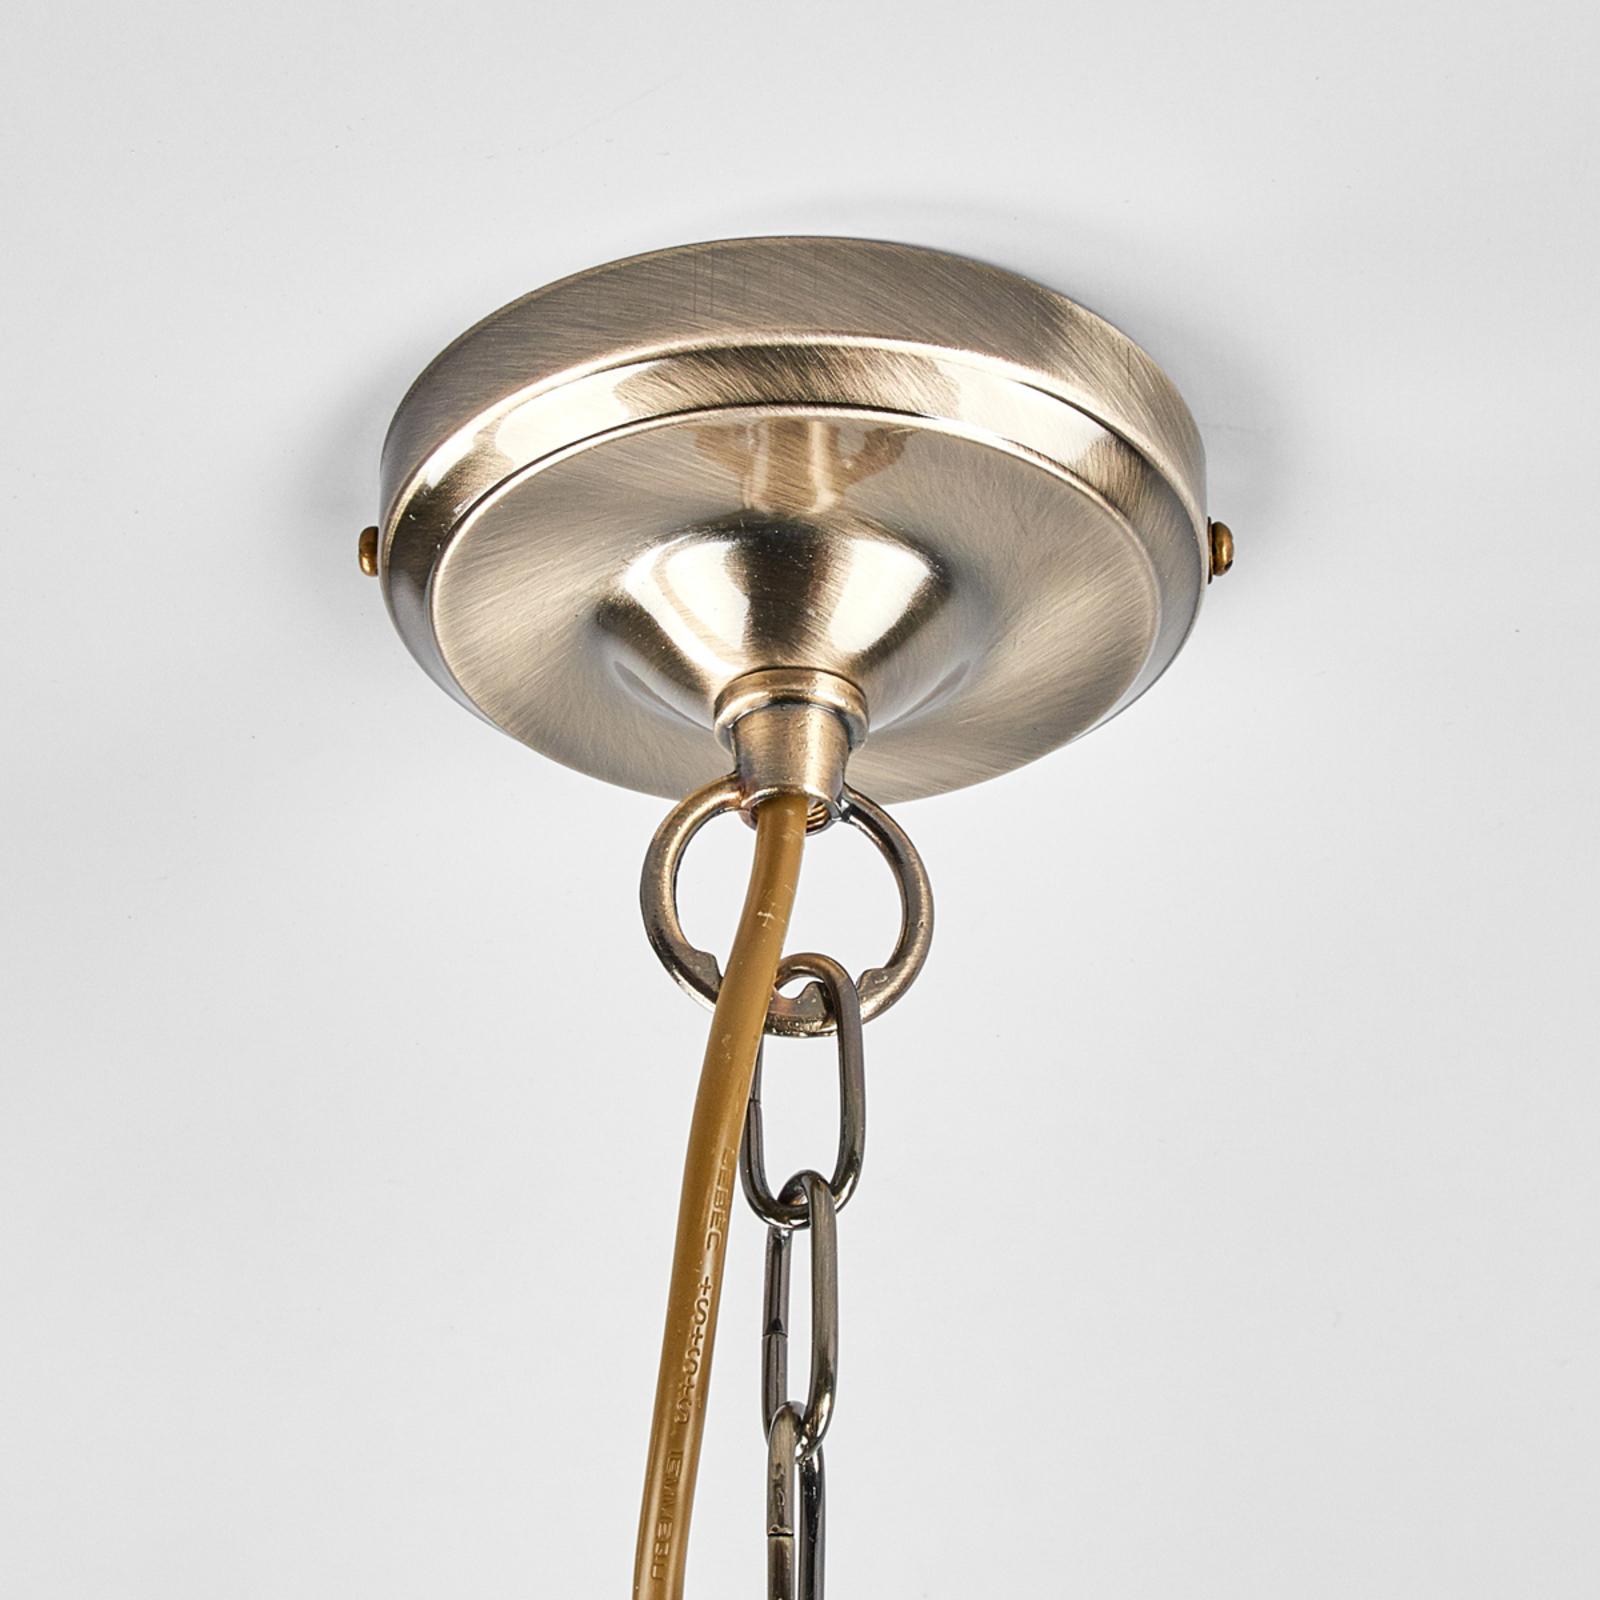 Oud-messing hanglamp CAMEROON, 1-lichts